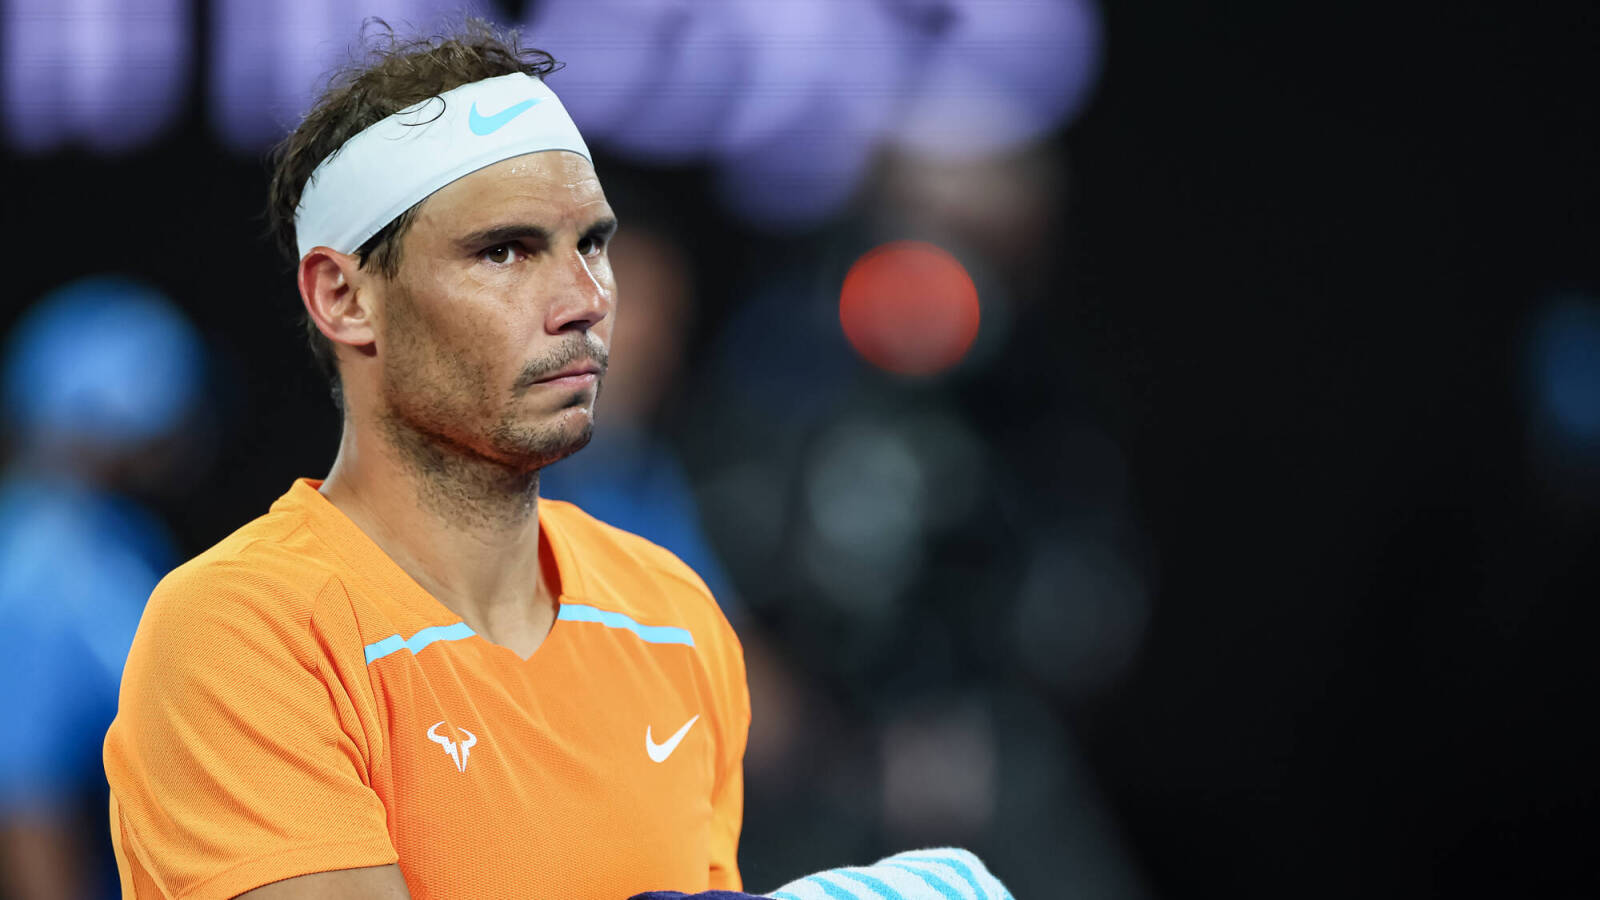 'I think he will play' Stan Wawrinka puts Rafael Nadal as a favorite for the Roland Garros despite injury concerns